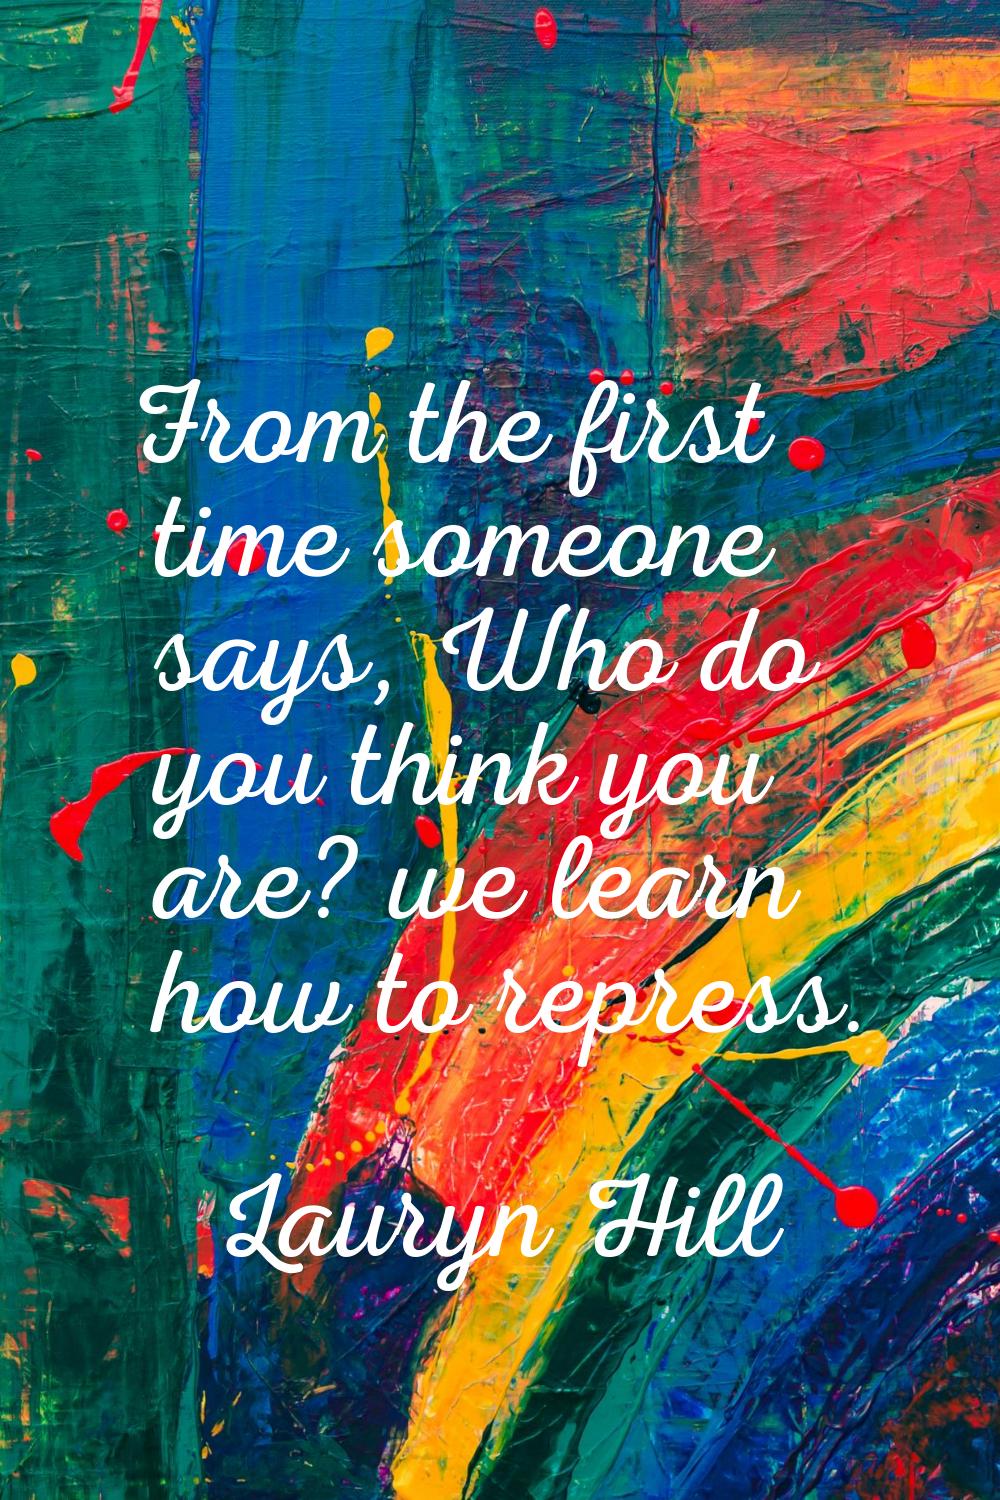 From the first time someone says, Who do you think you are? we learn how to repress.